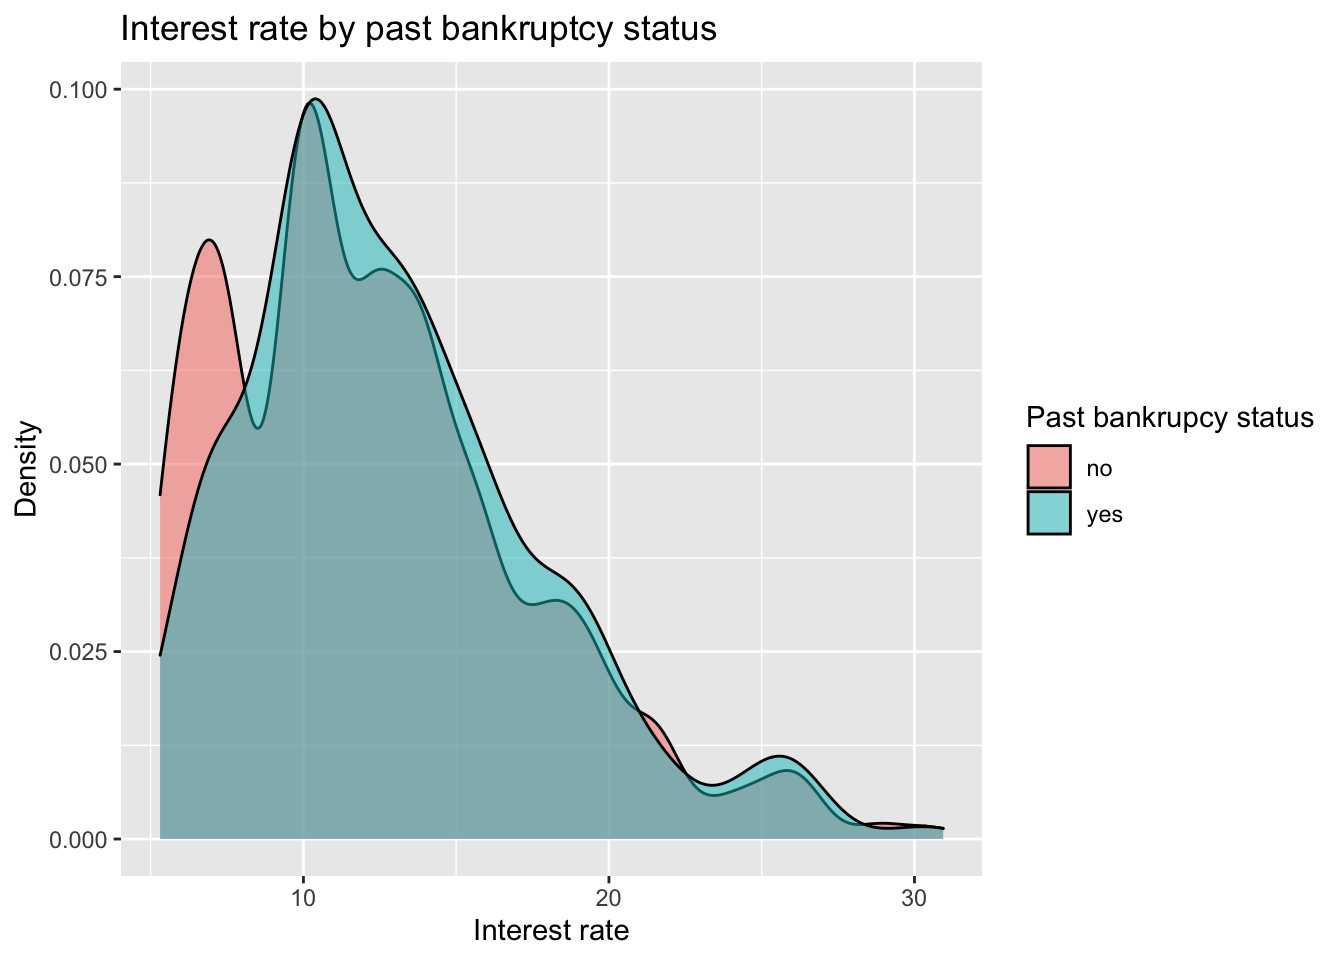 Density plot of interest rate by past bankruptcy status. For applicants with and without past bankrupty interest rates have a right skewed distribution. Typical interest is higher for those with bankrupty and the distribution is unimodal, while it is bimodal for those without.